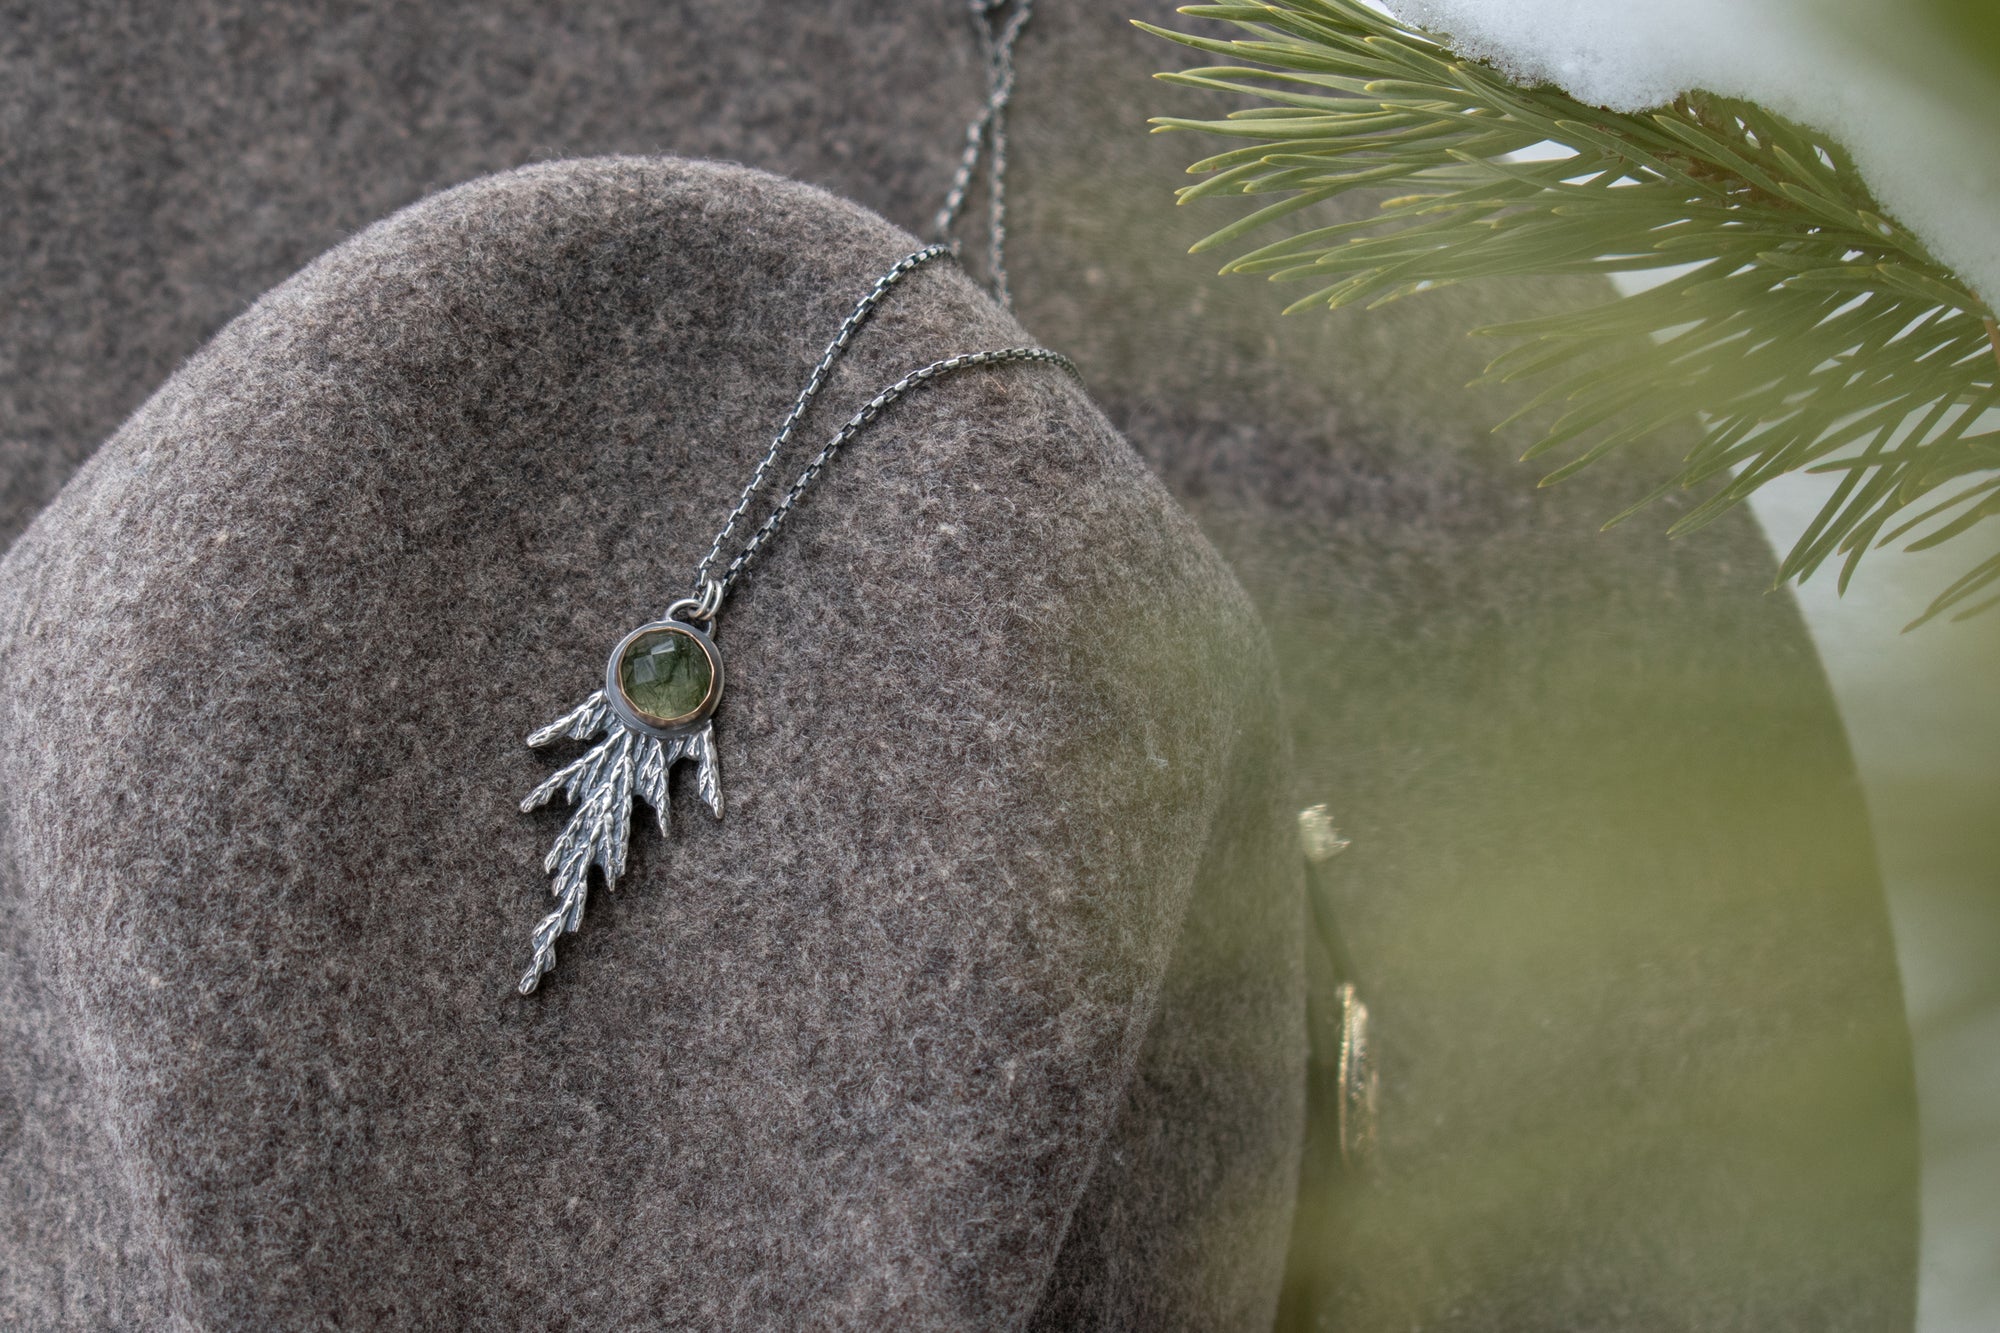 Handmade sterling silver cedar necklace with green stone set in 14k gold draped on women's hat with evergreen in foreground